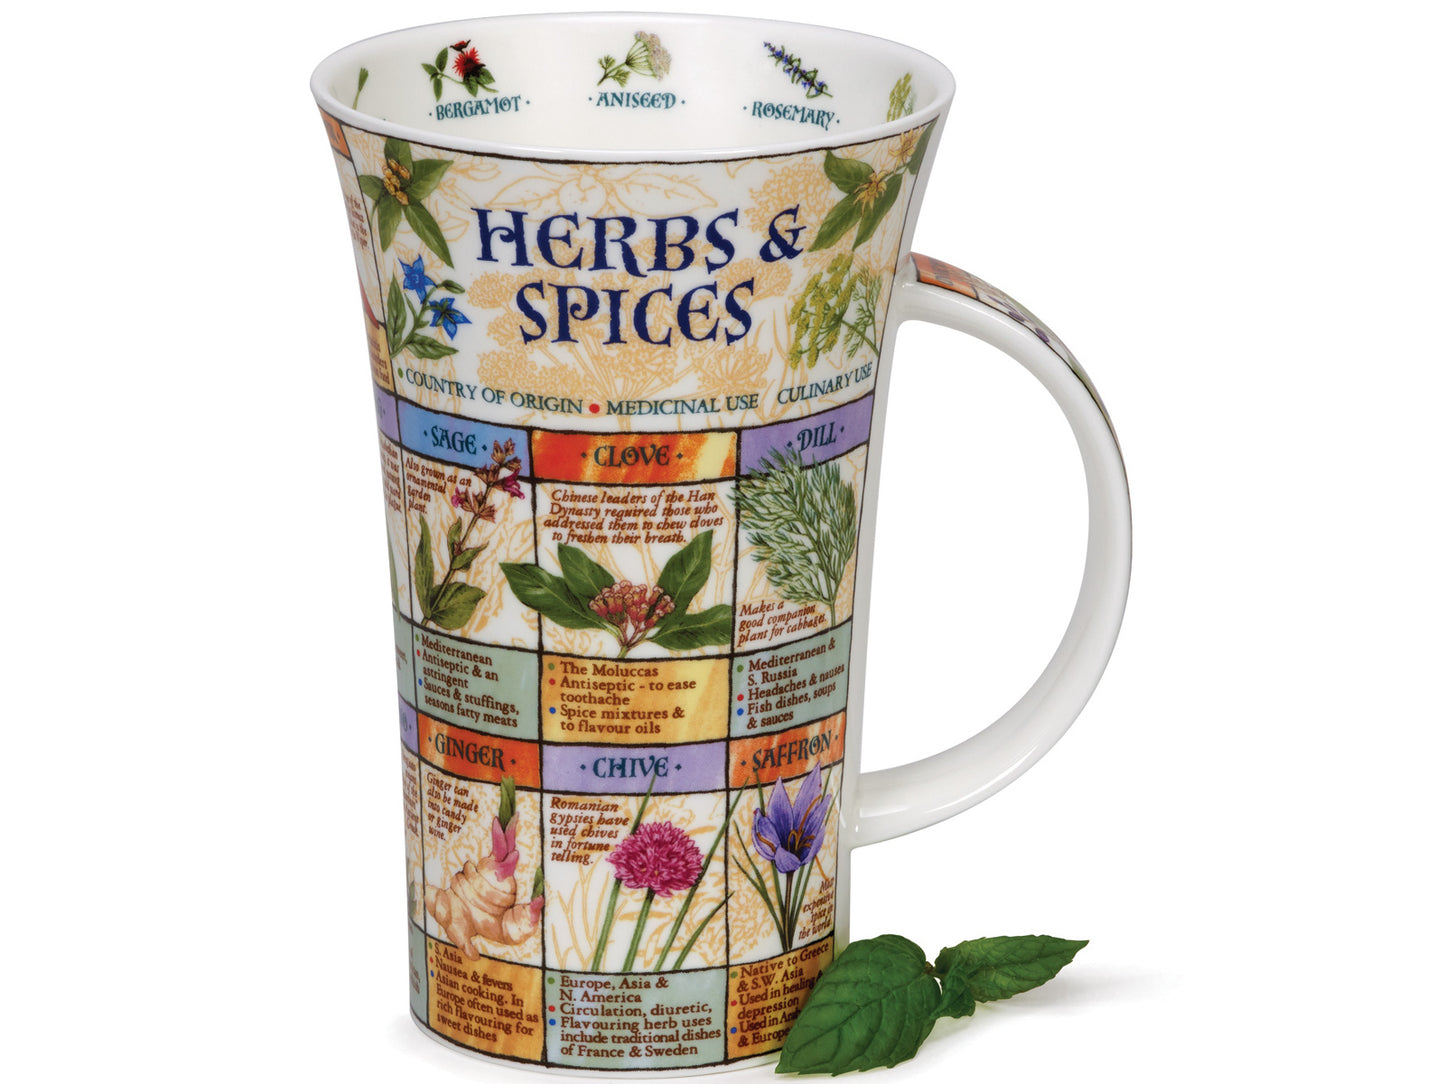 Dunoon Glencoe Herbs & Spices Mug is a large fine bone china mug that depicts various different herbs and spices around its exterior, along with their medicinal and culinary uses, as well as pictures of different herbs running around the inner rim of the mug.